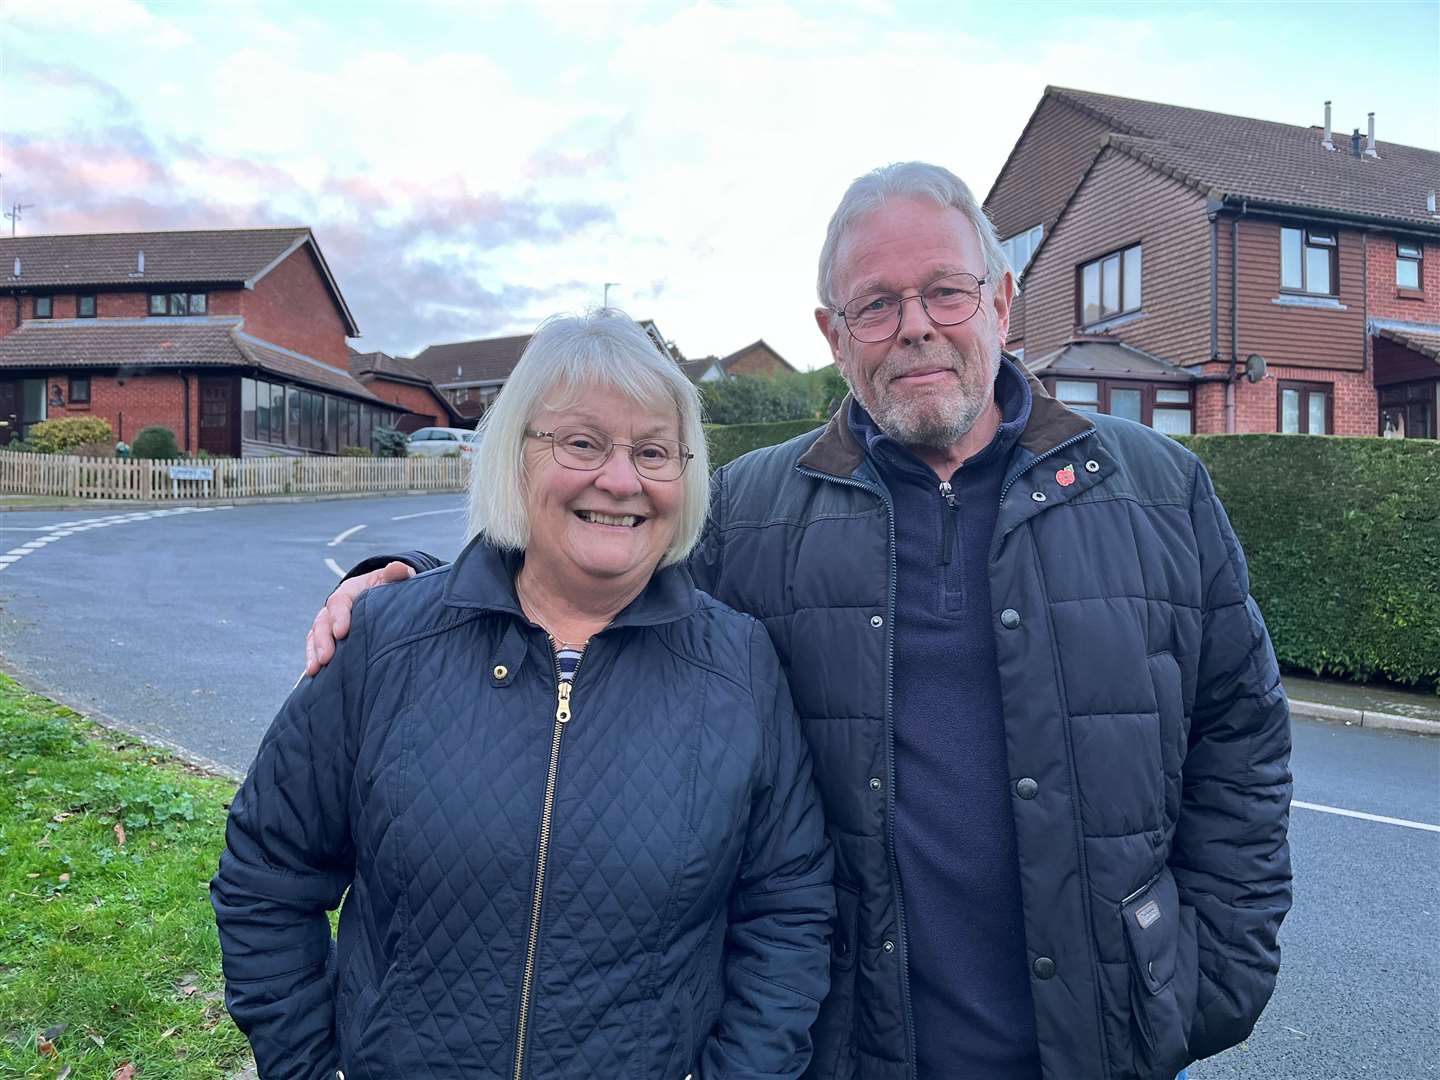 David and Elaine Taylor live opposite the proposed development and say the increase in traffic would be terrible